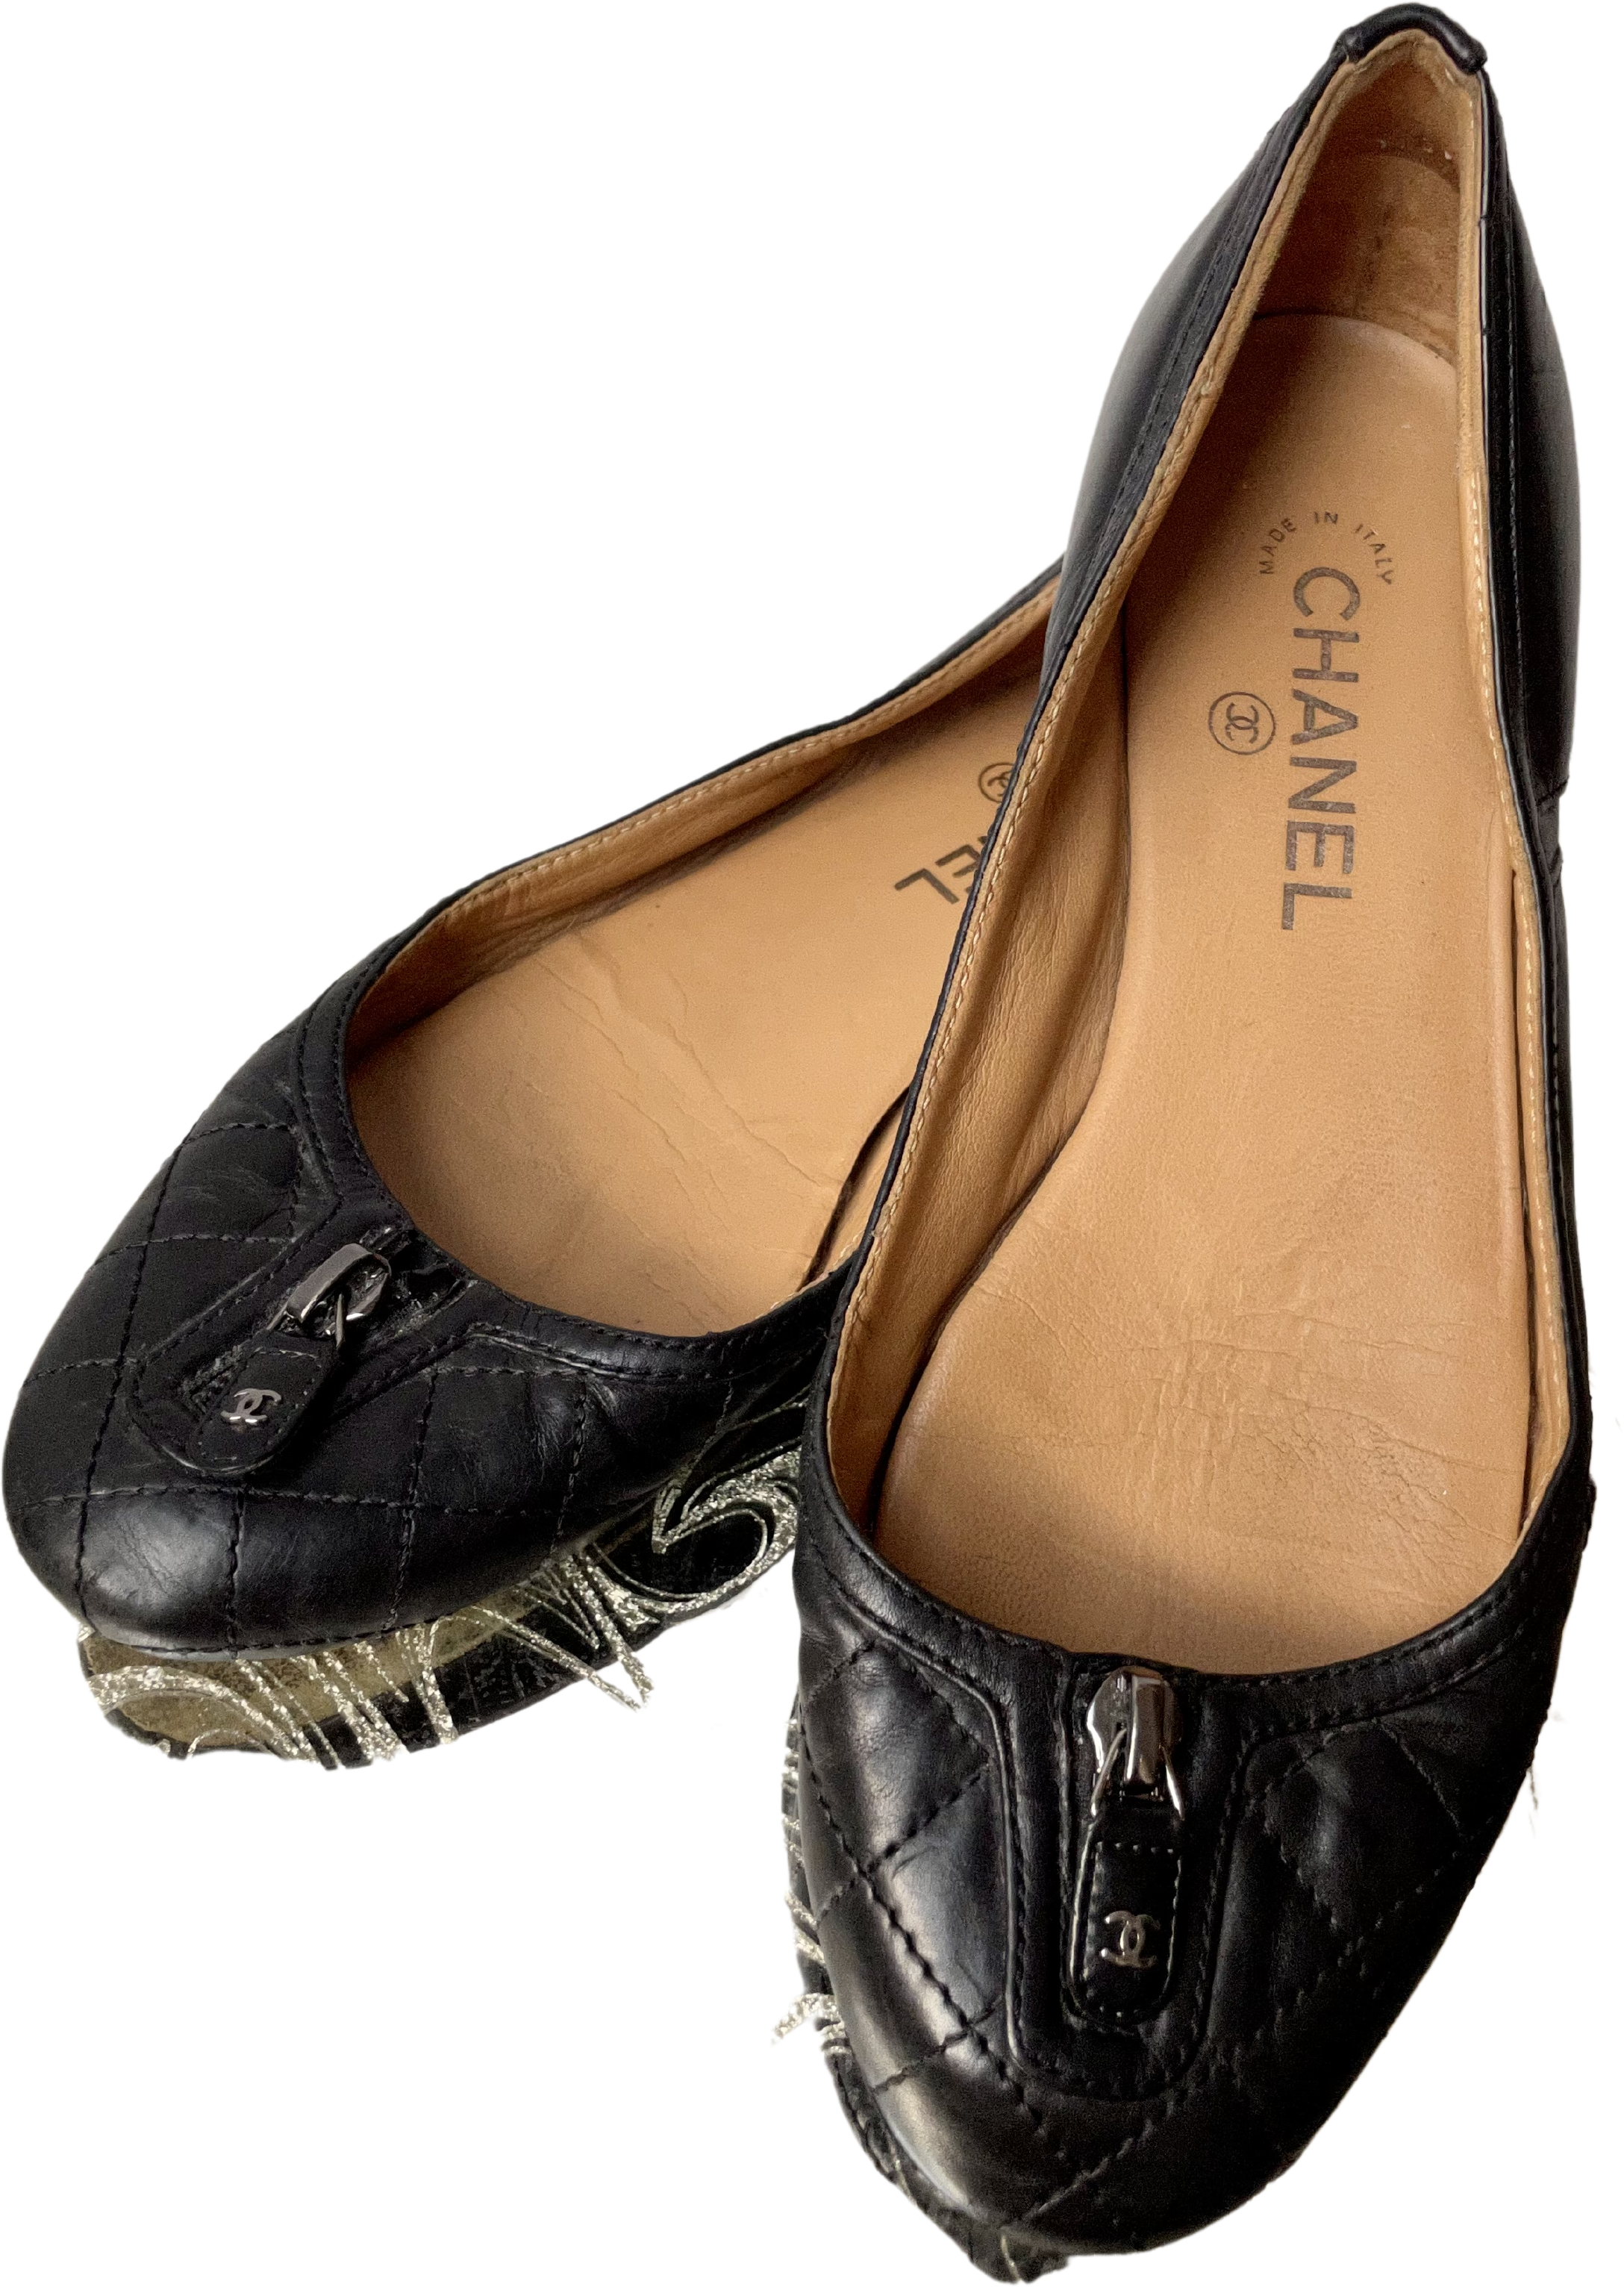 chanel quilted ballet flats